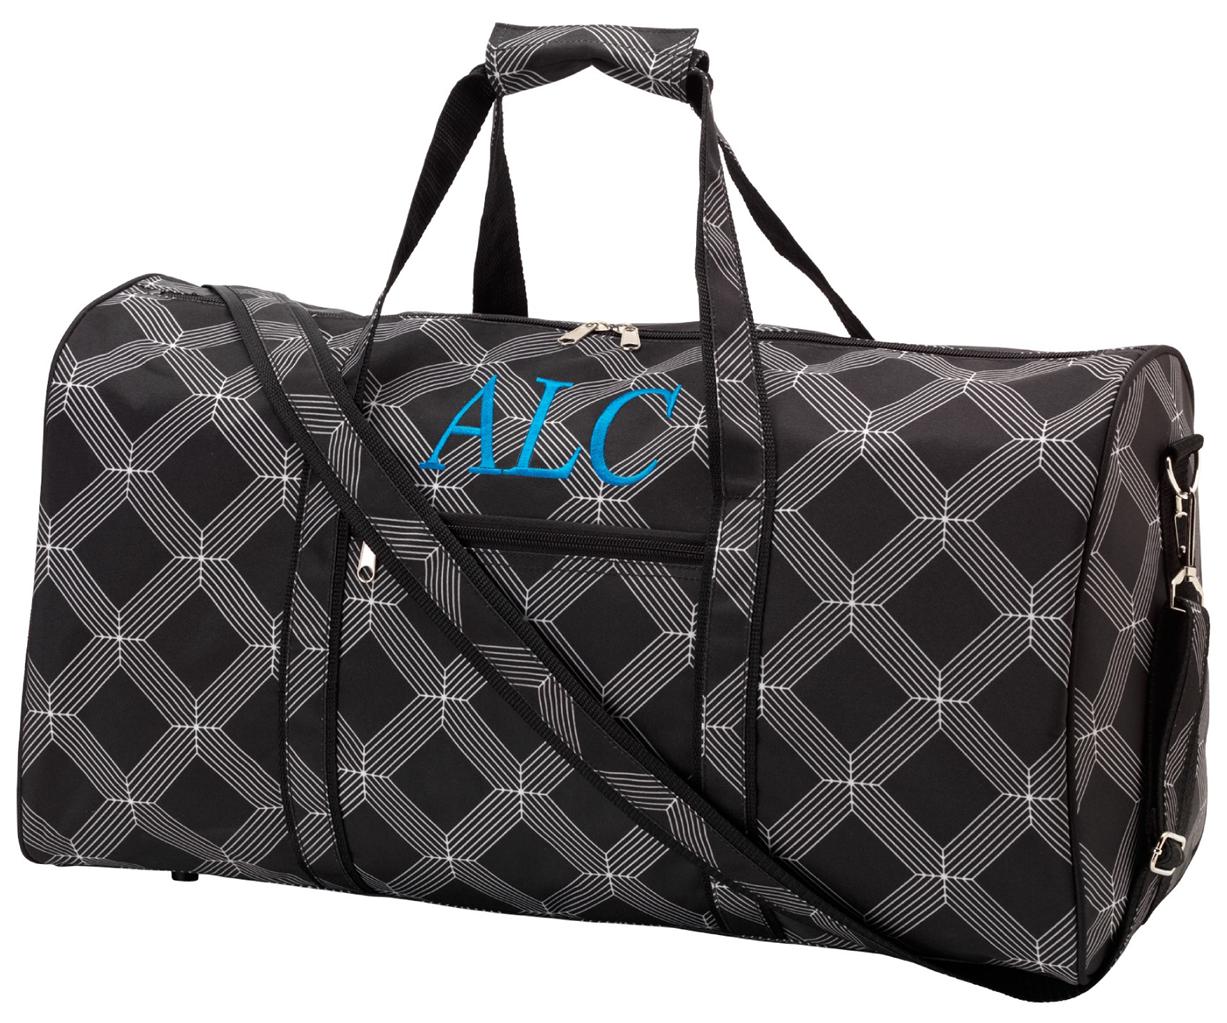 PERSONALIZED One 21&quot; Travel Tote DUFFEL BAG Sports Gym MONOGRAMMED Thirty Style | eBay